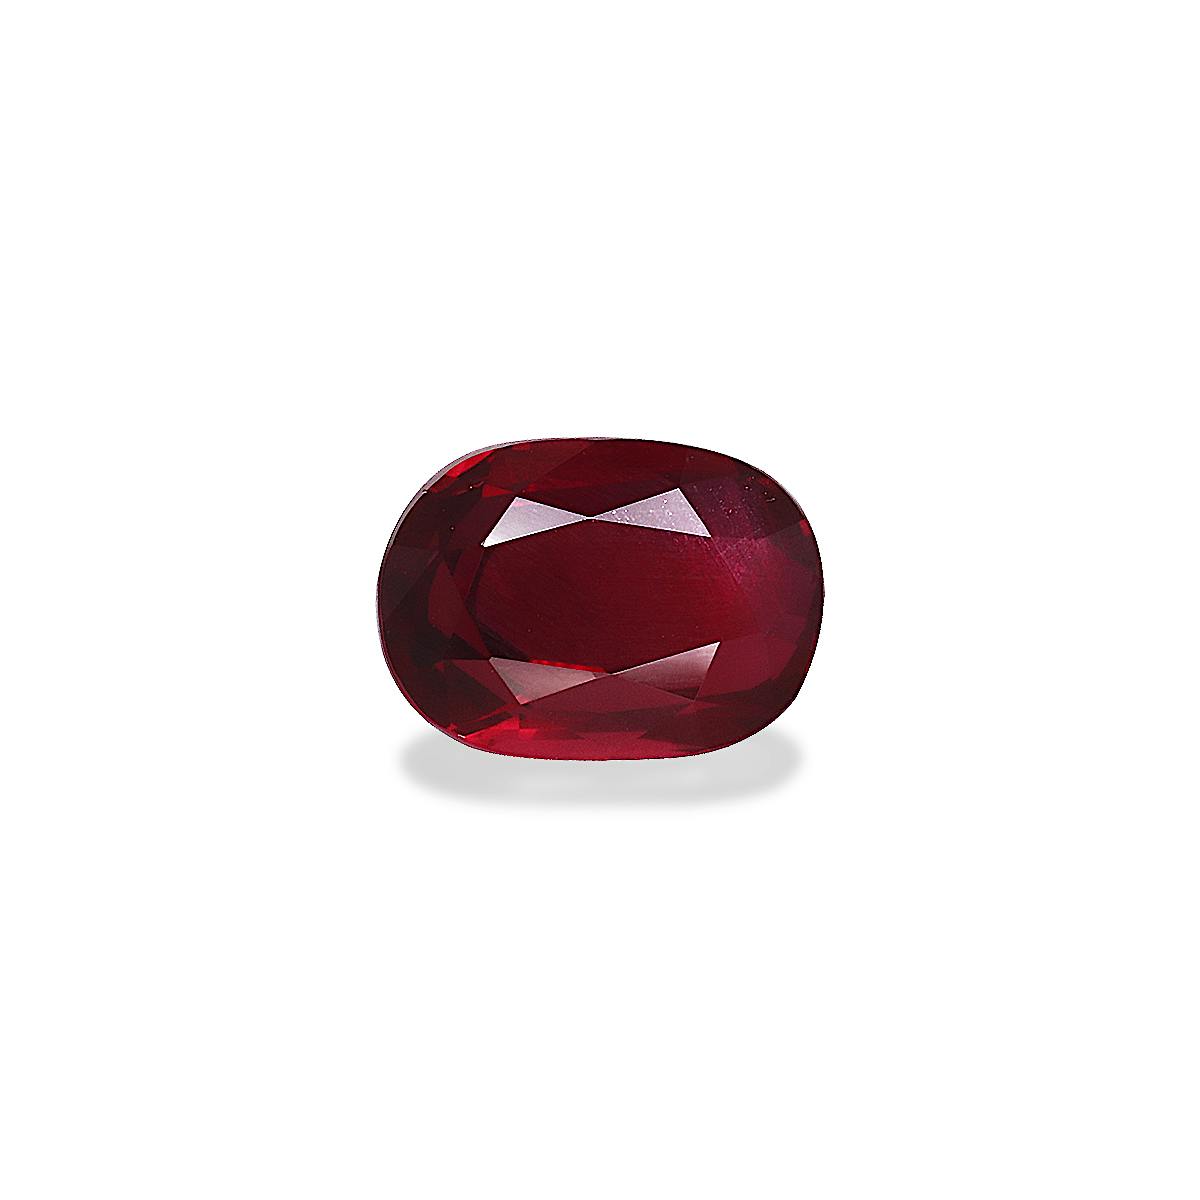 Mozambique Ruby 3.05ct - Main Image